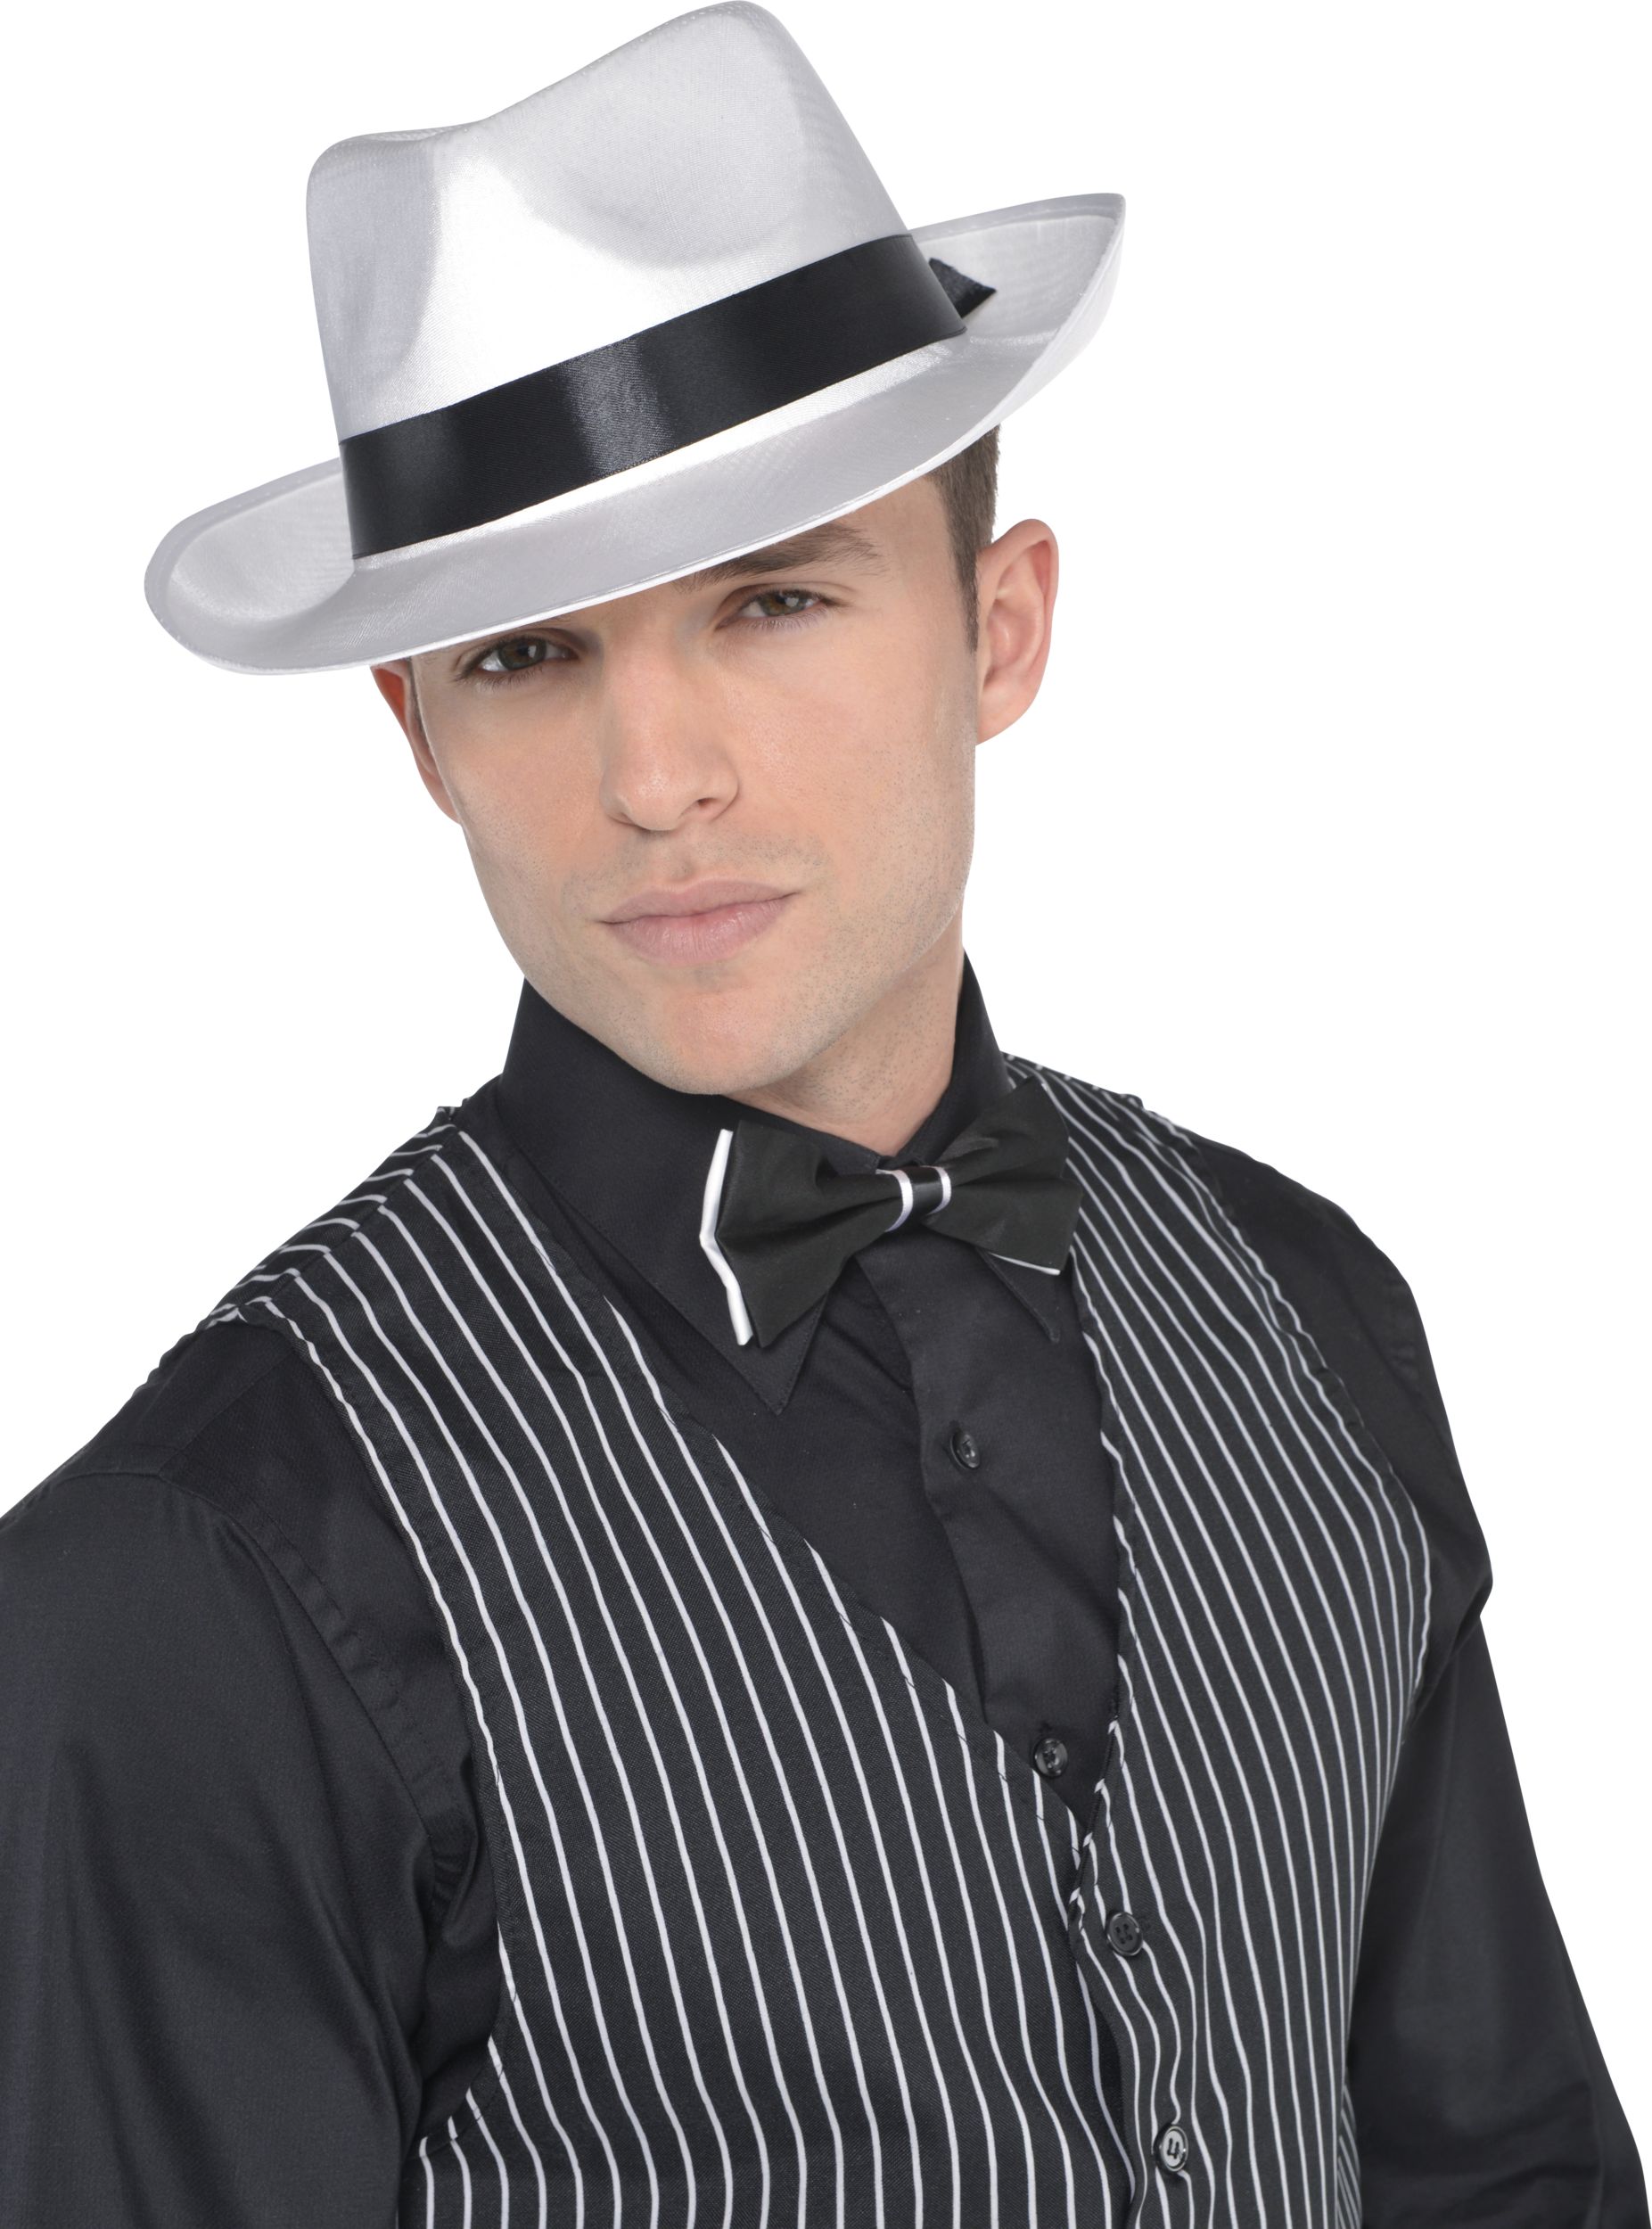 Gangster Mob Hat, White/Black, One Size, Wearable Costume Accessory for ...